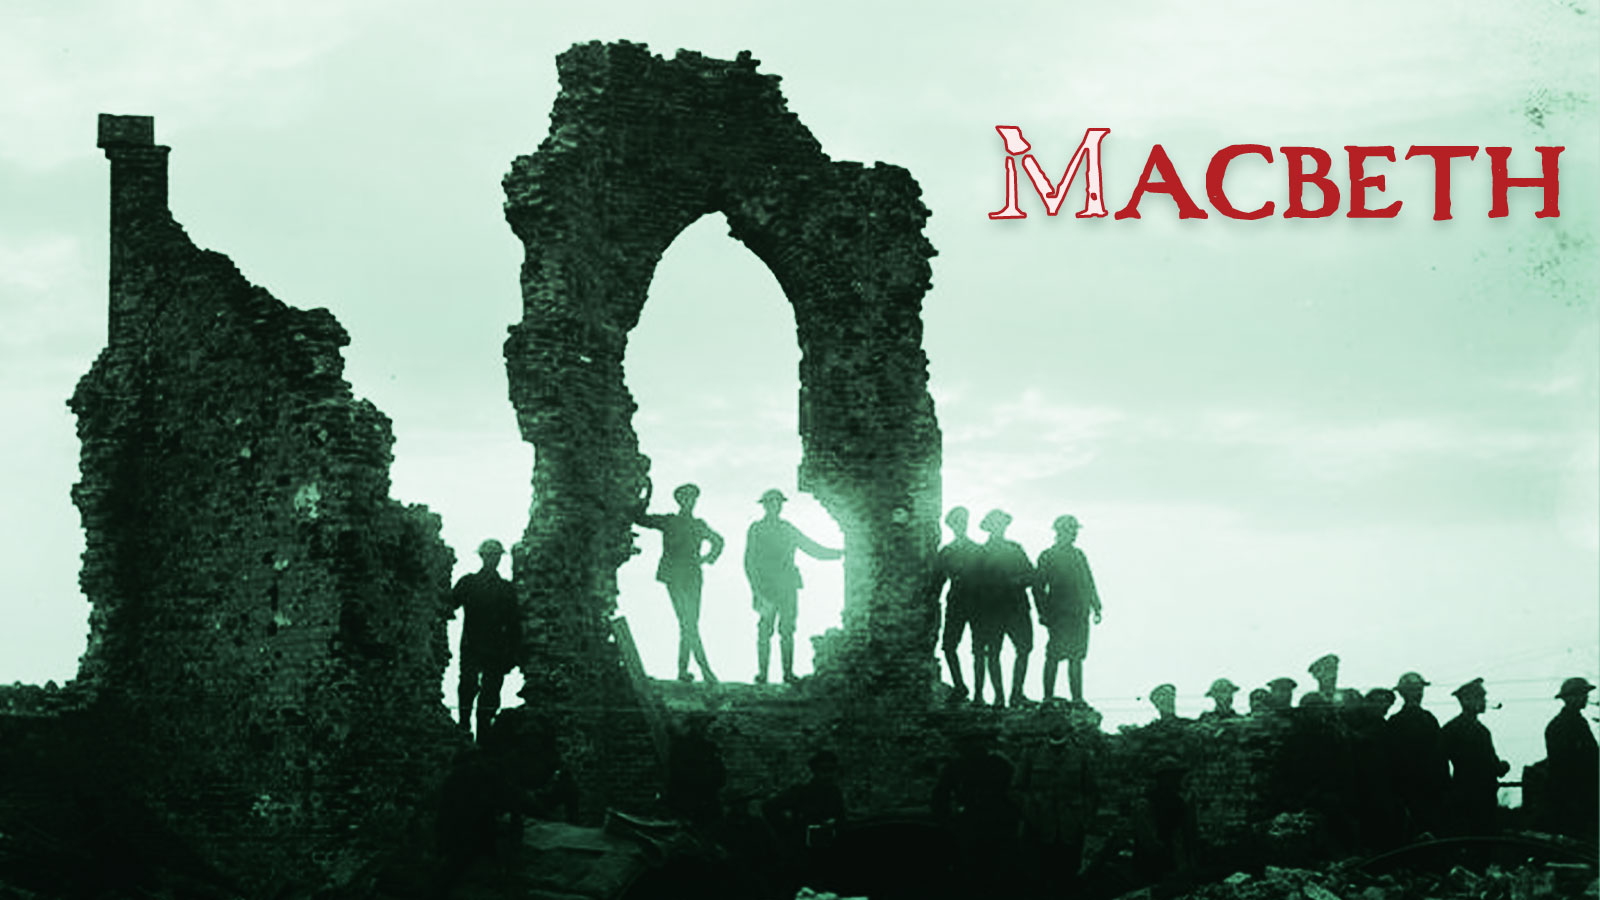 Ruins and silhouetted soldiers with text "MACBETH"